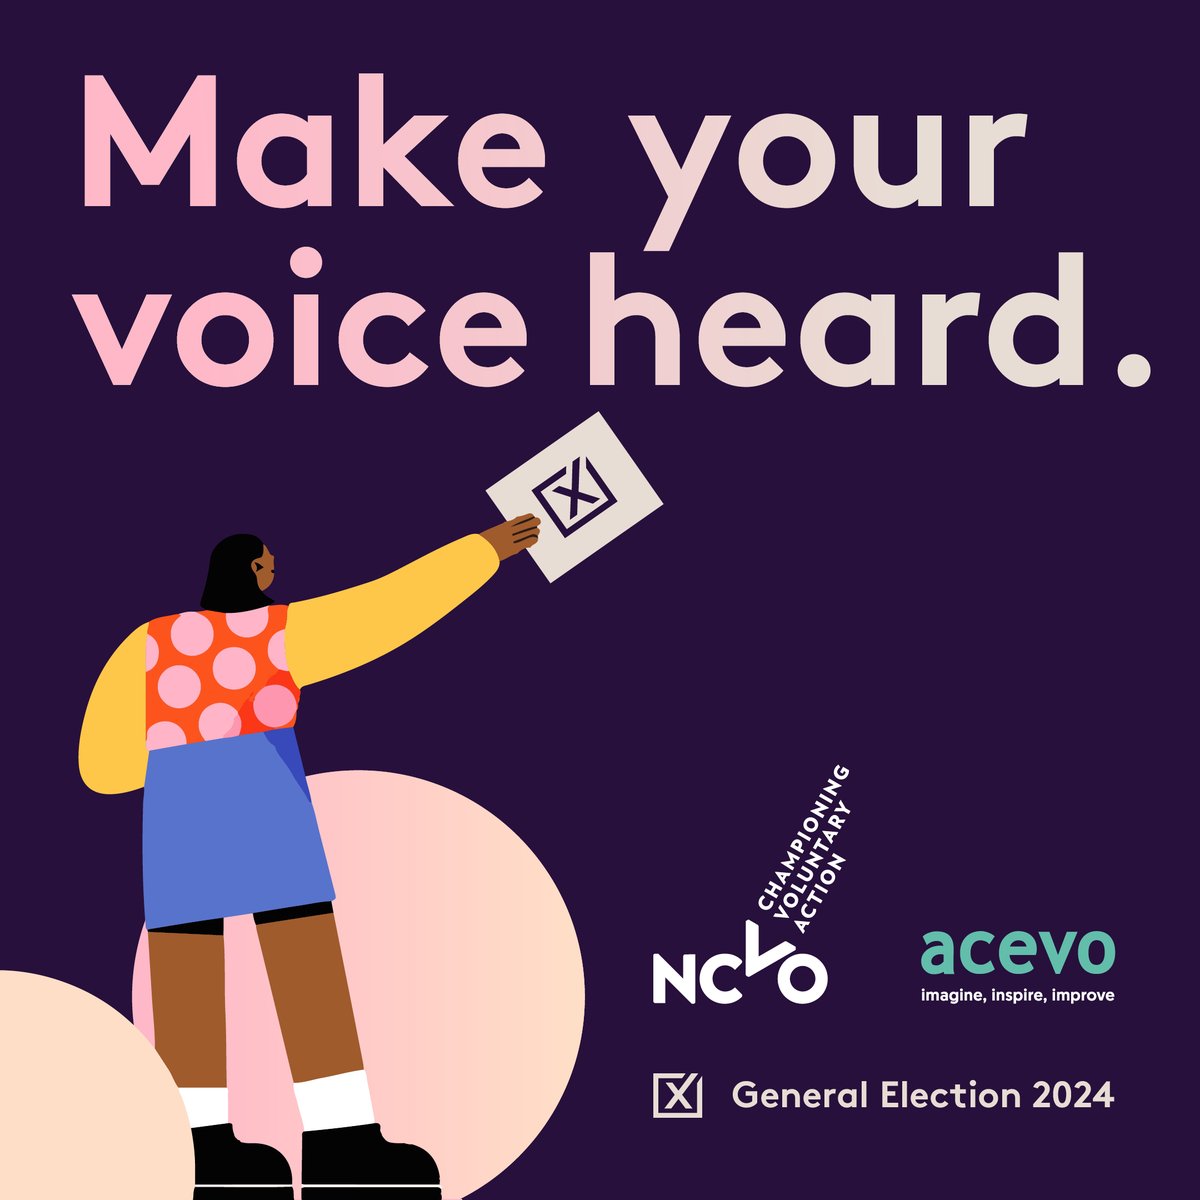 📢 The Voluntary Sector Manifesto from @NCVO and @ACEVO is here! Created by the sector, for the sector, this manifesto is a chance to get your voice heard in the lead up to the #GeneralElection. Download and use it today: bit.ly/3V4WKVy #VoluntarySectorManifesto